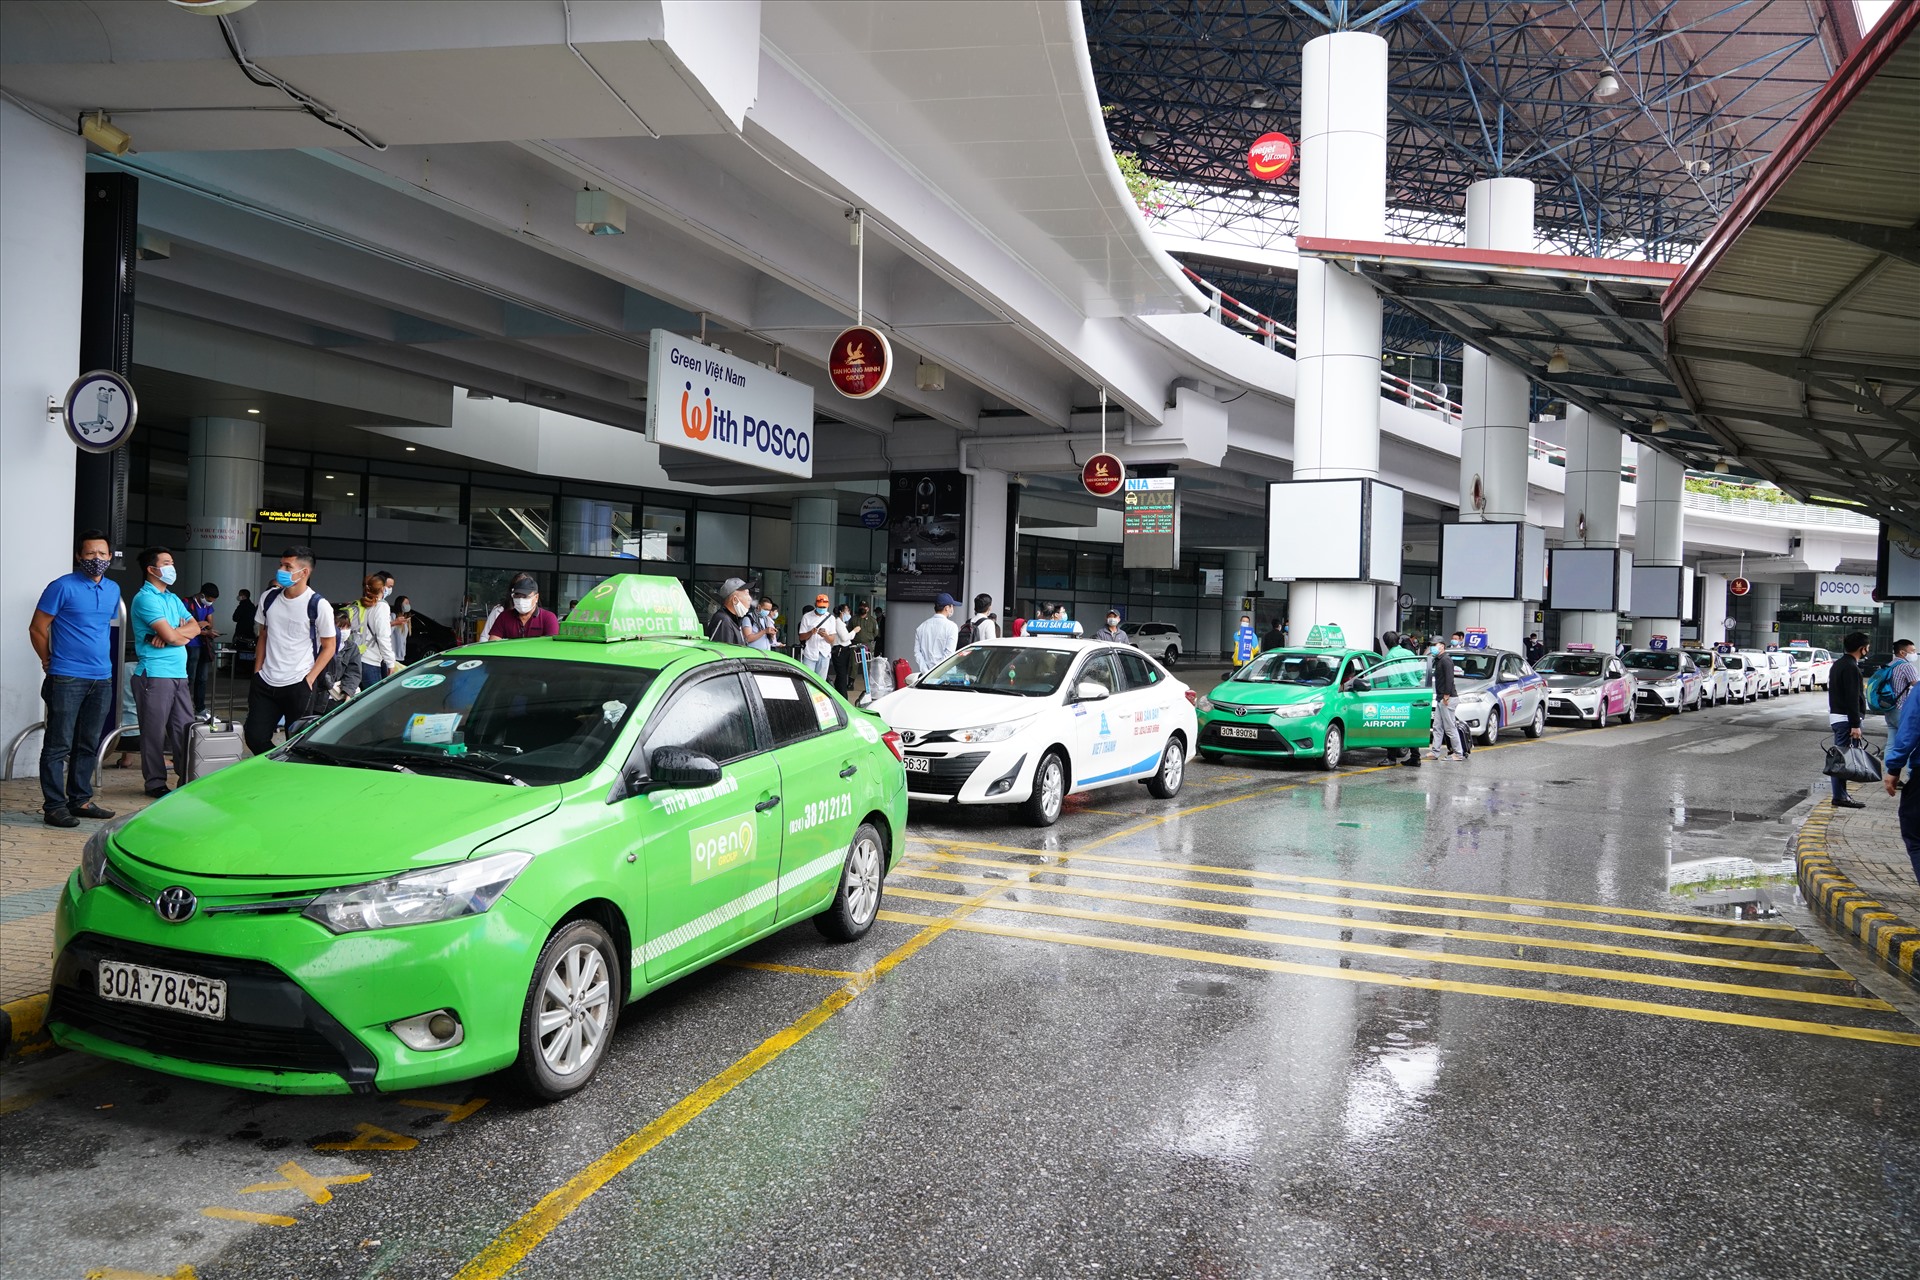 Getting From Noi Bai Airport To Downtown By Taxi